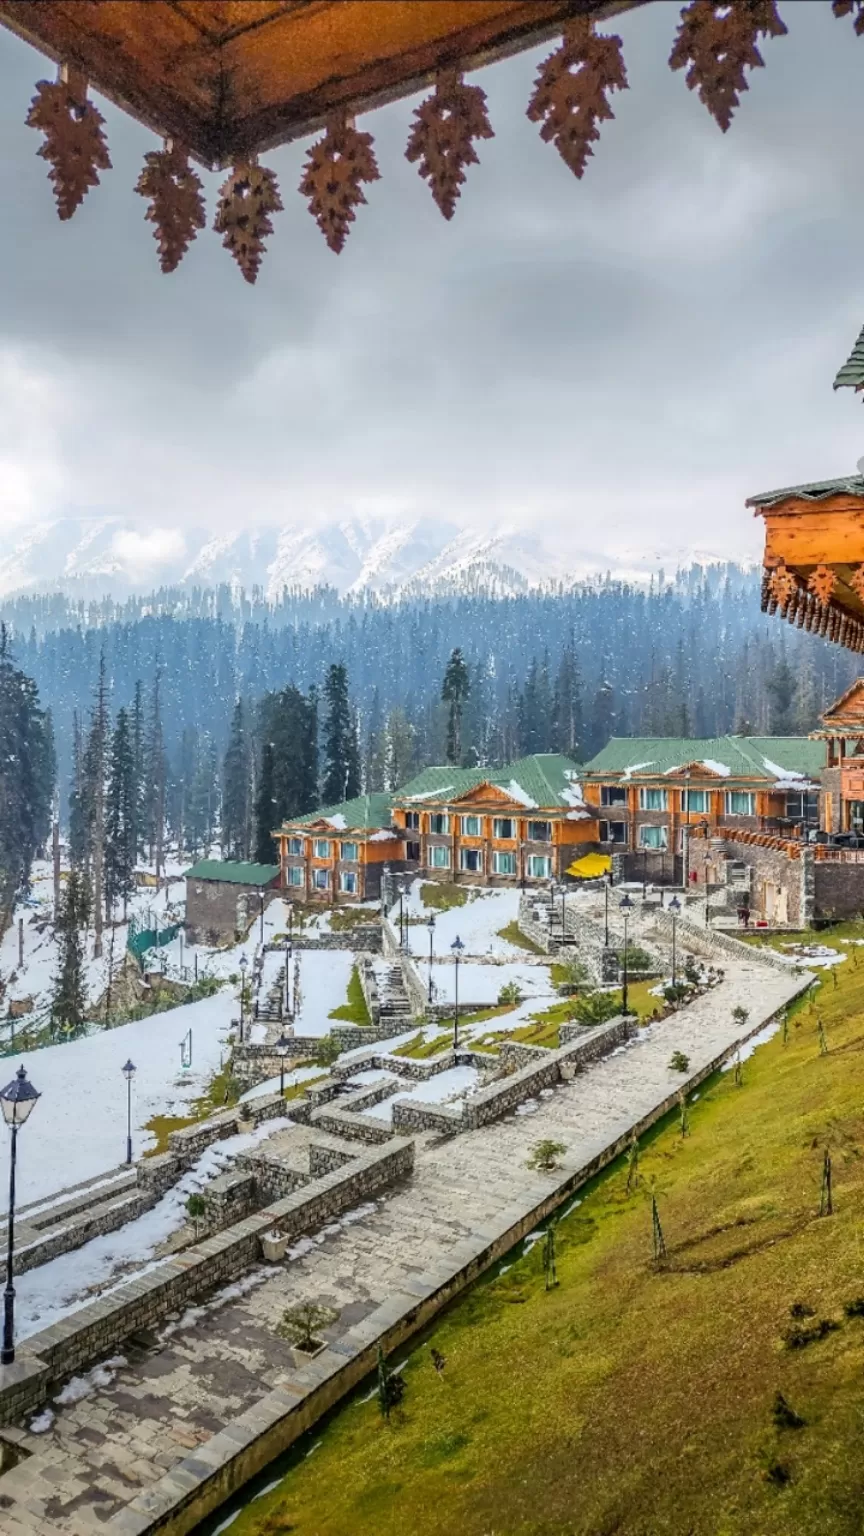 Photo of The Khyber Himalayan Resort & Spa By Amit Kumar